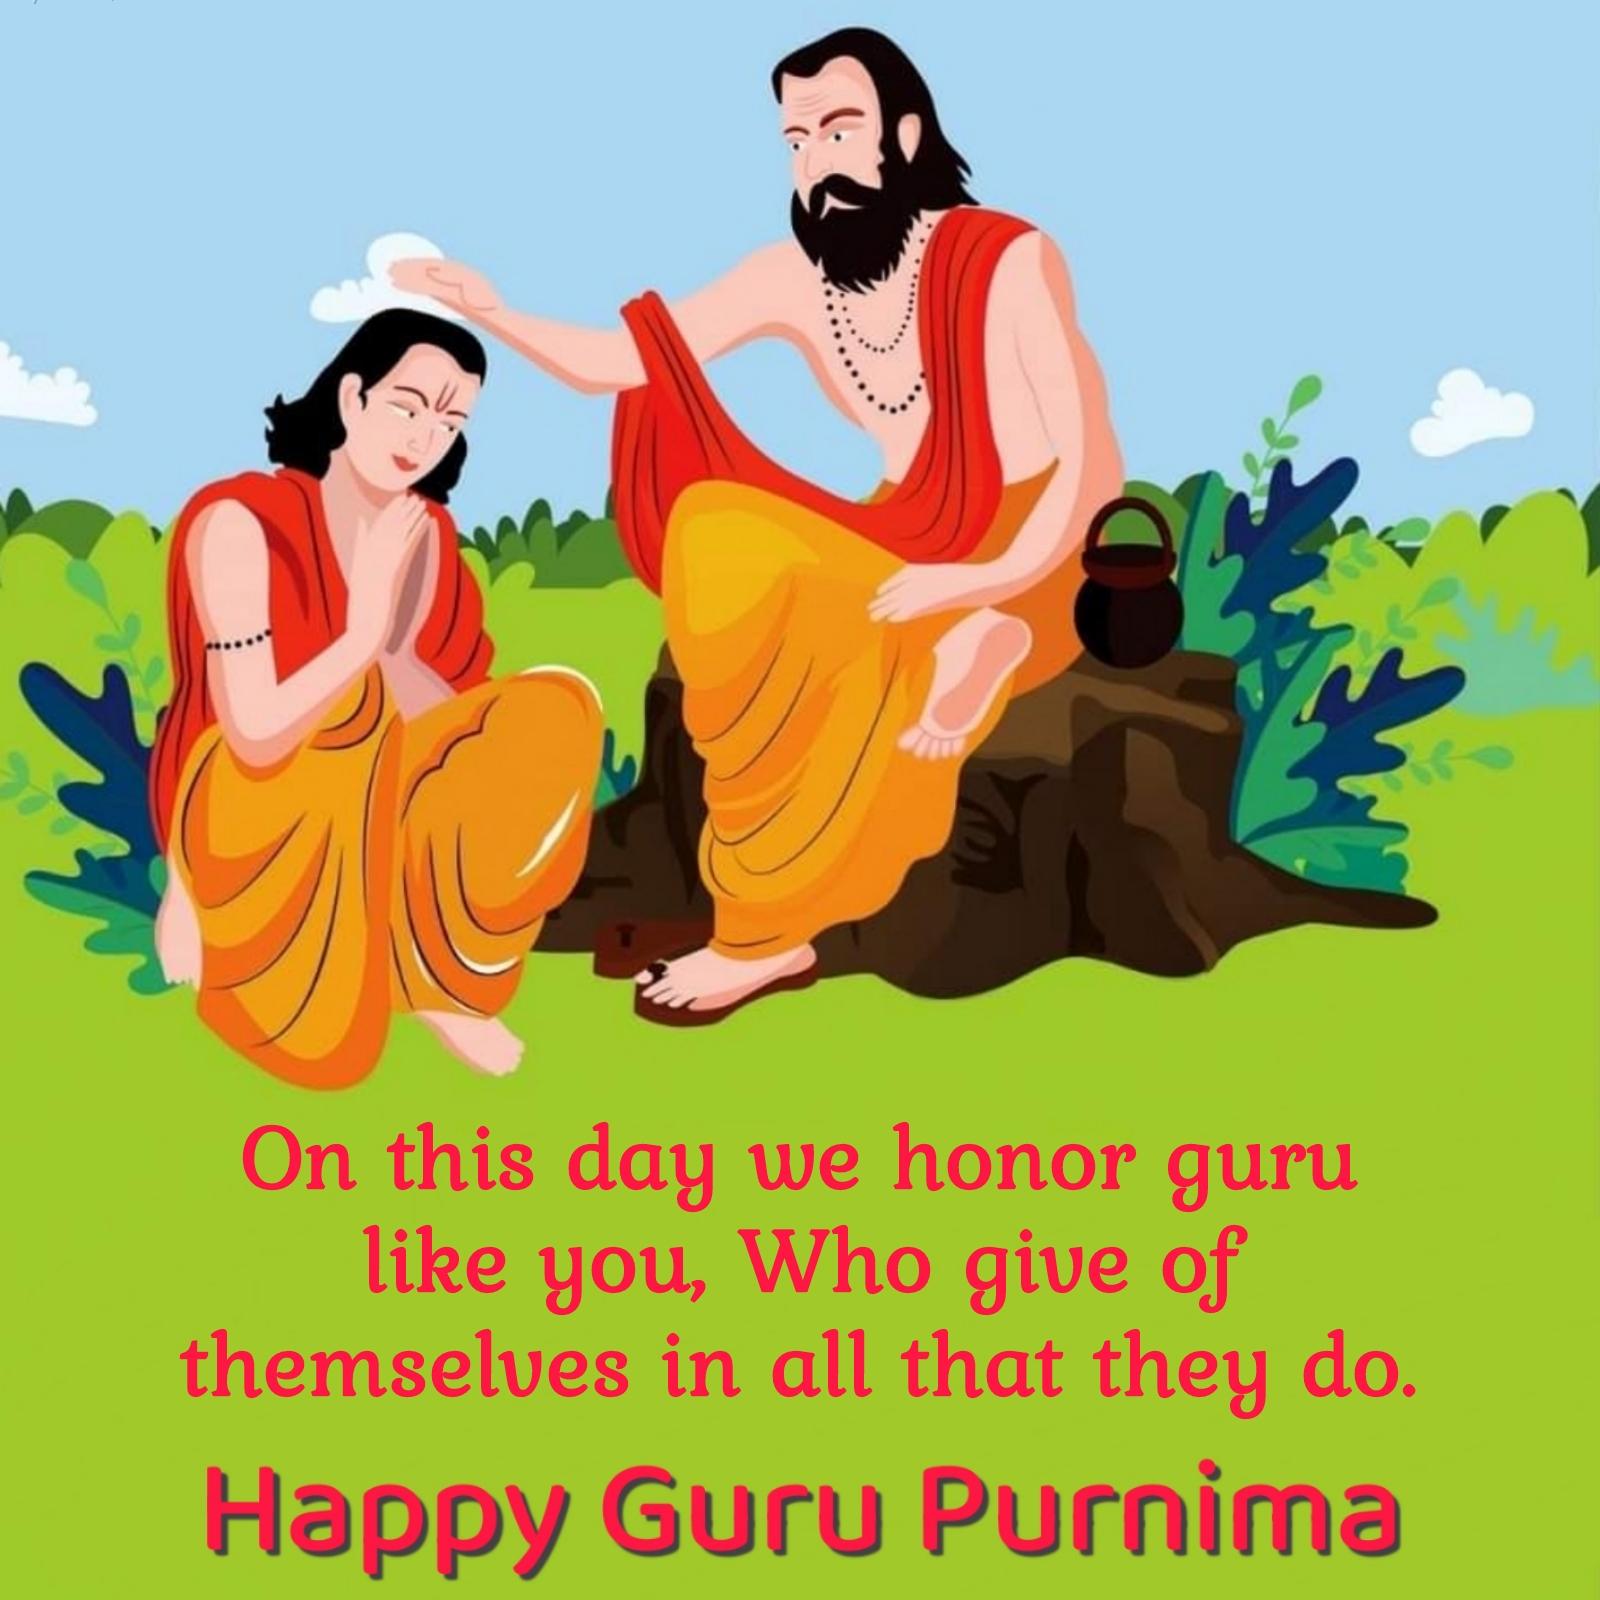 On this day we honor guru like you Who give of themselves